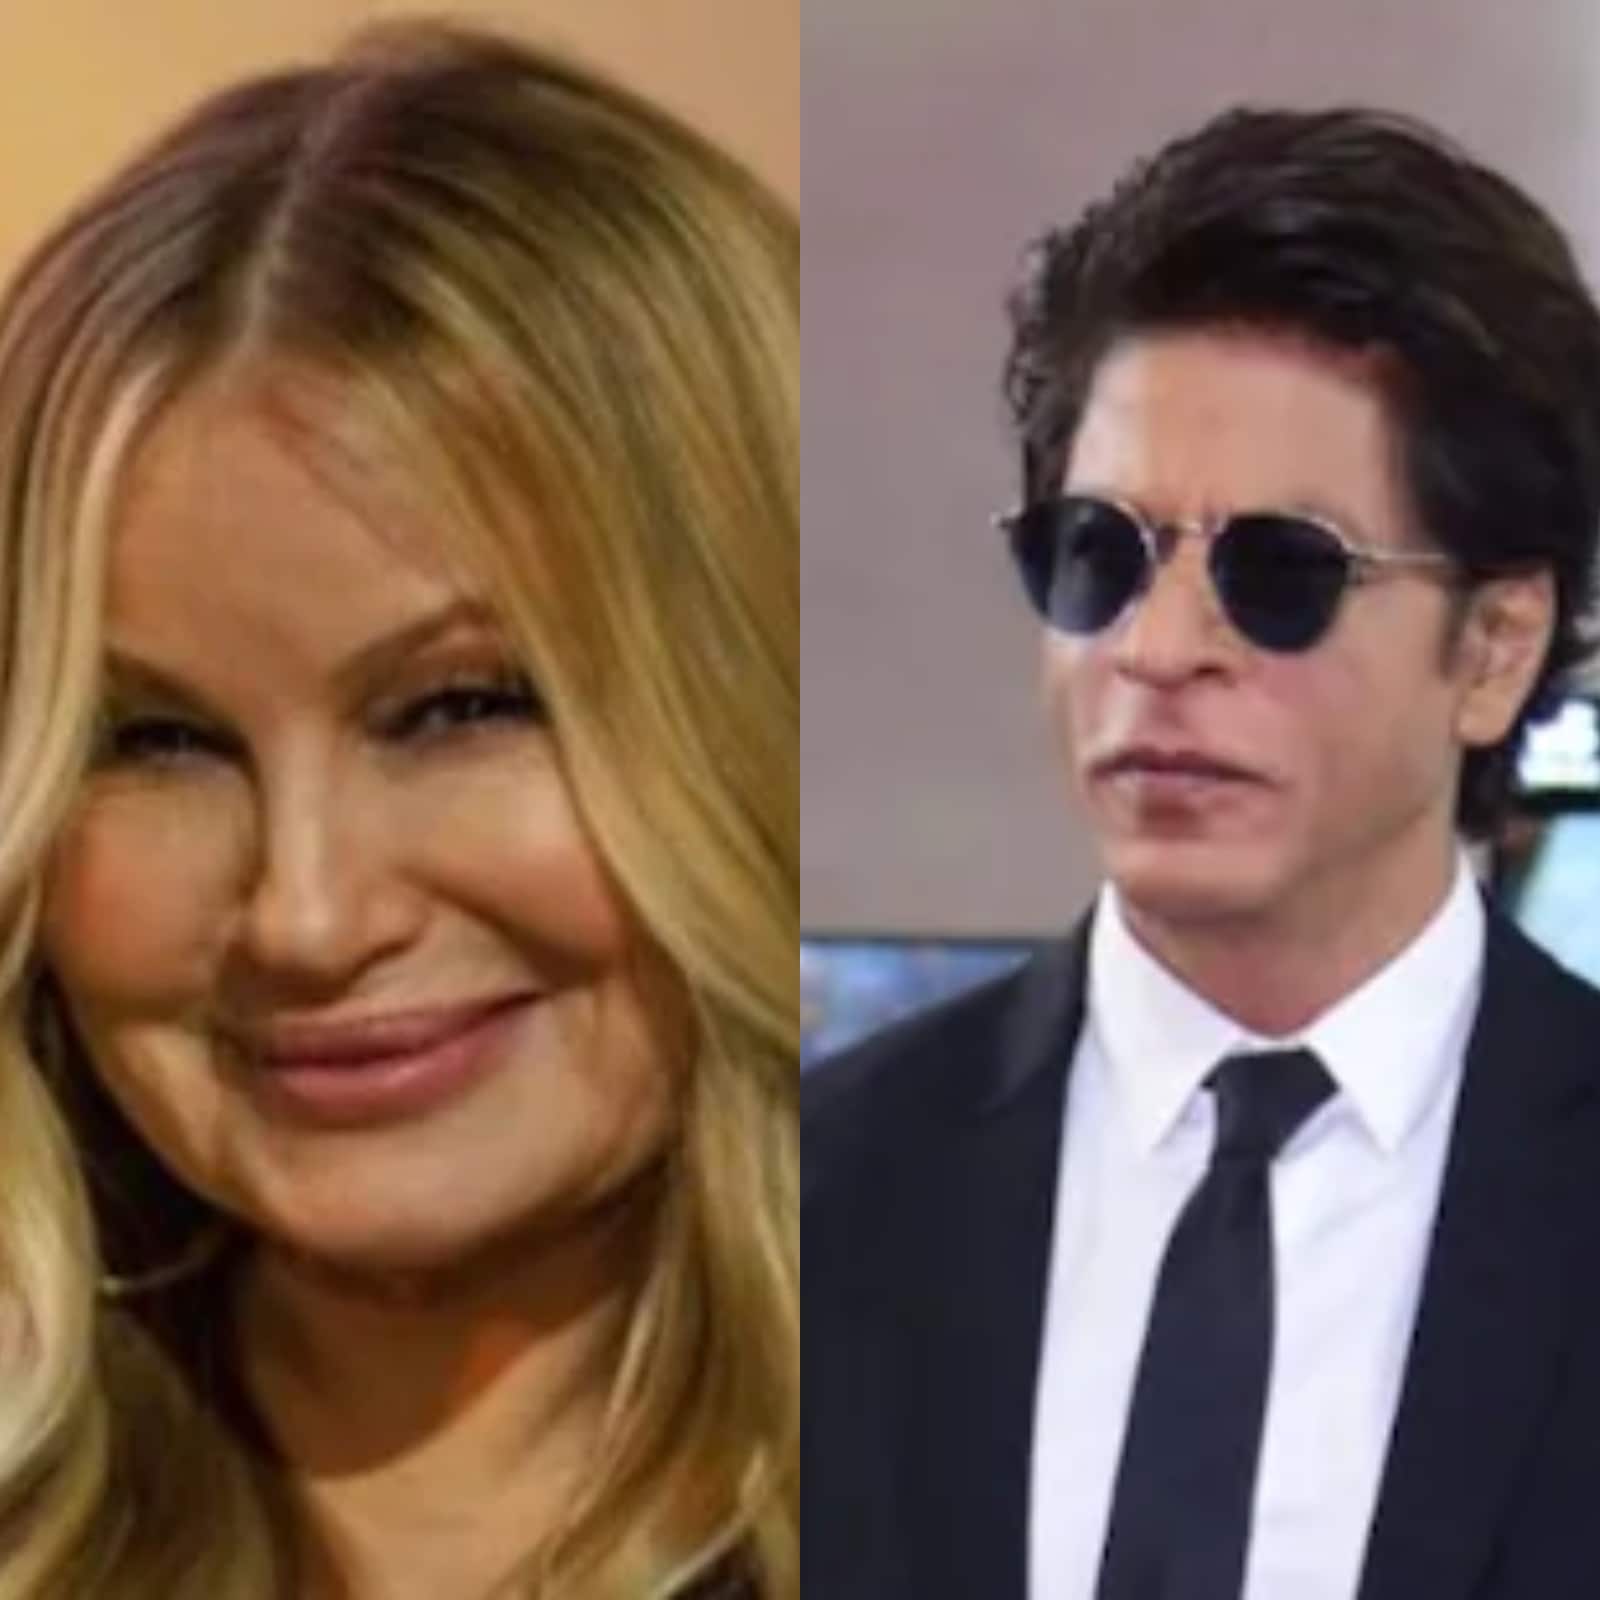 Coolidge Xxx Vidoes - Jennifer Coolidge Admits To Sleeping With 200 People After American Pie;  Shah Rukh Khan Takes a Break With Darlings - News18